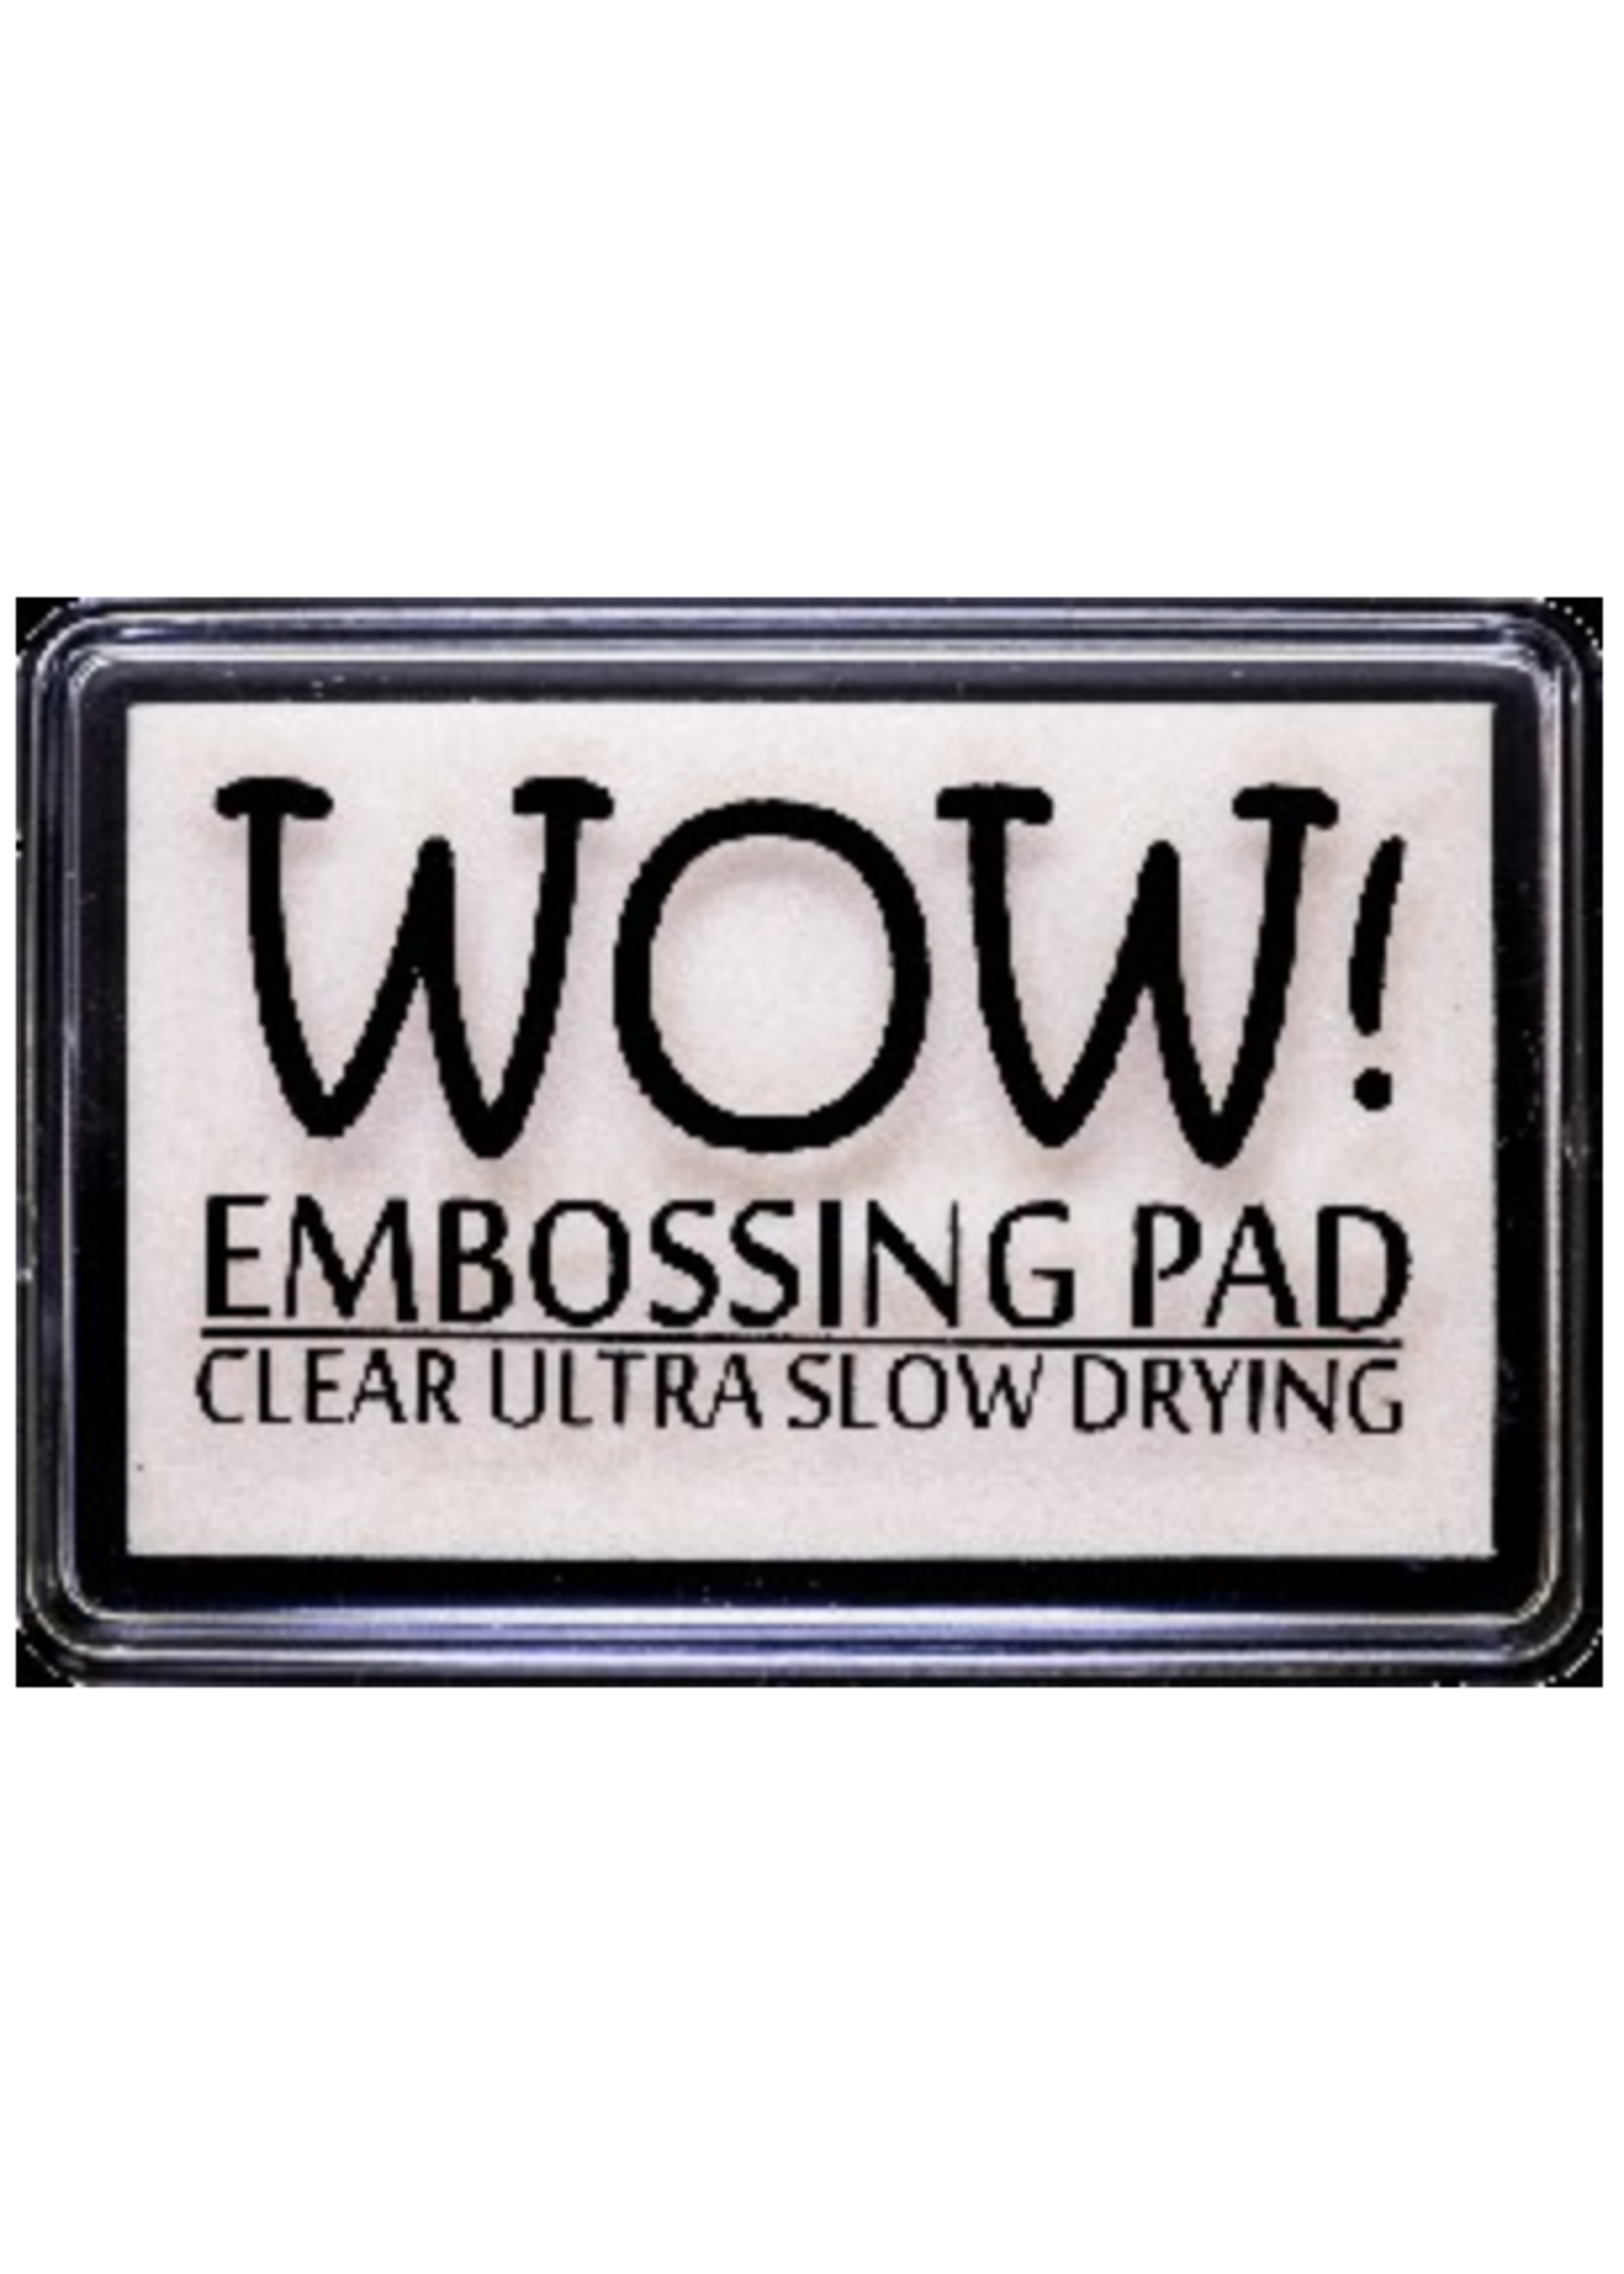 wow! Wow! embossing pad